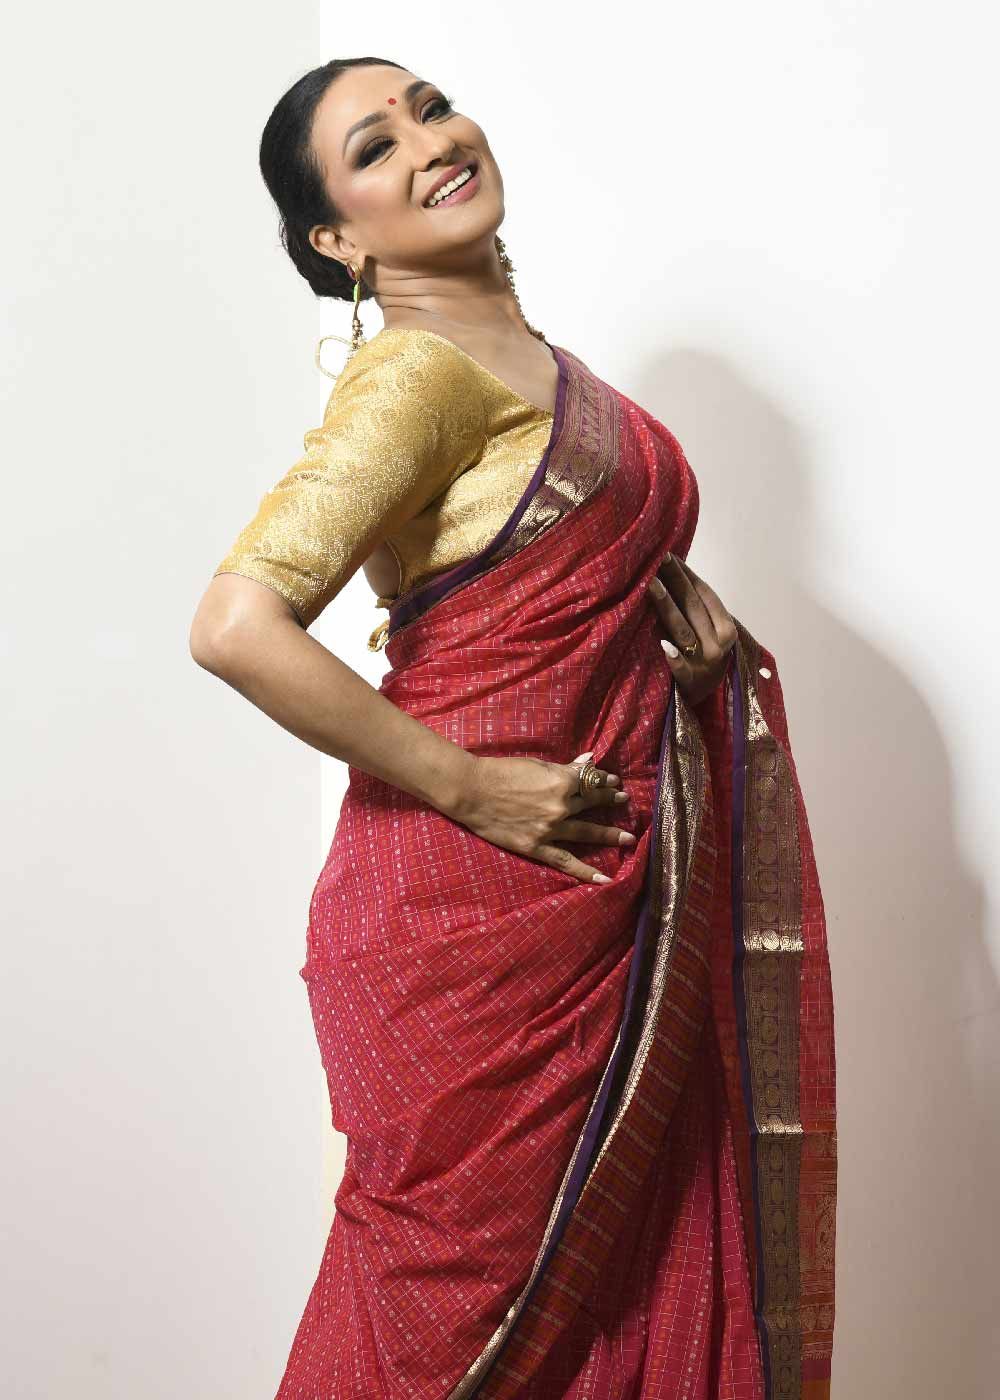 Rituparna is wearing golden blouse with red saree.